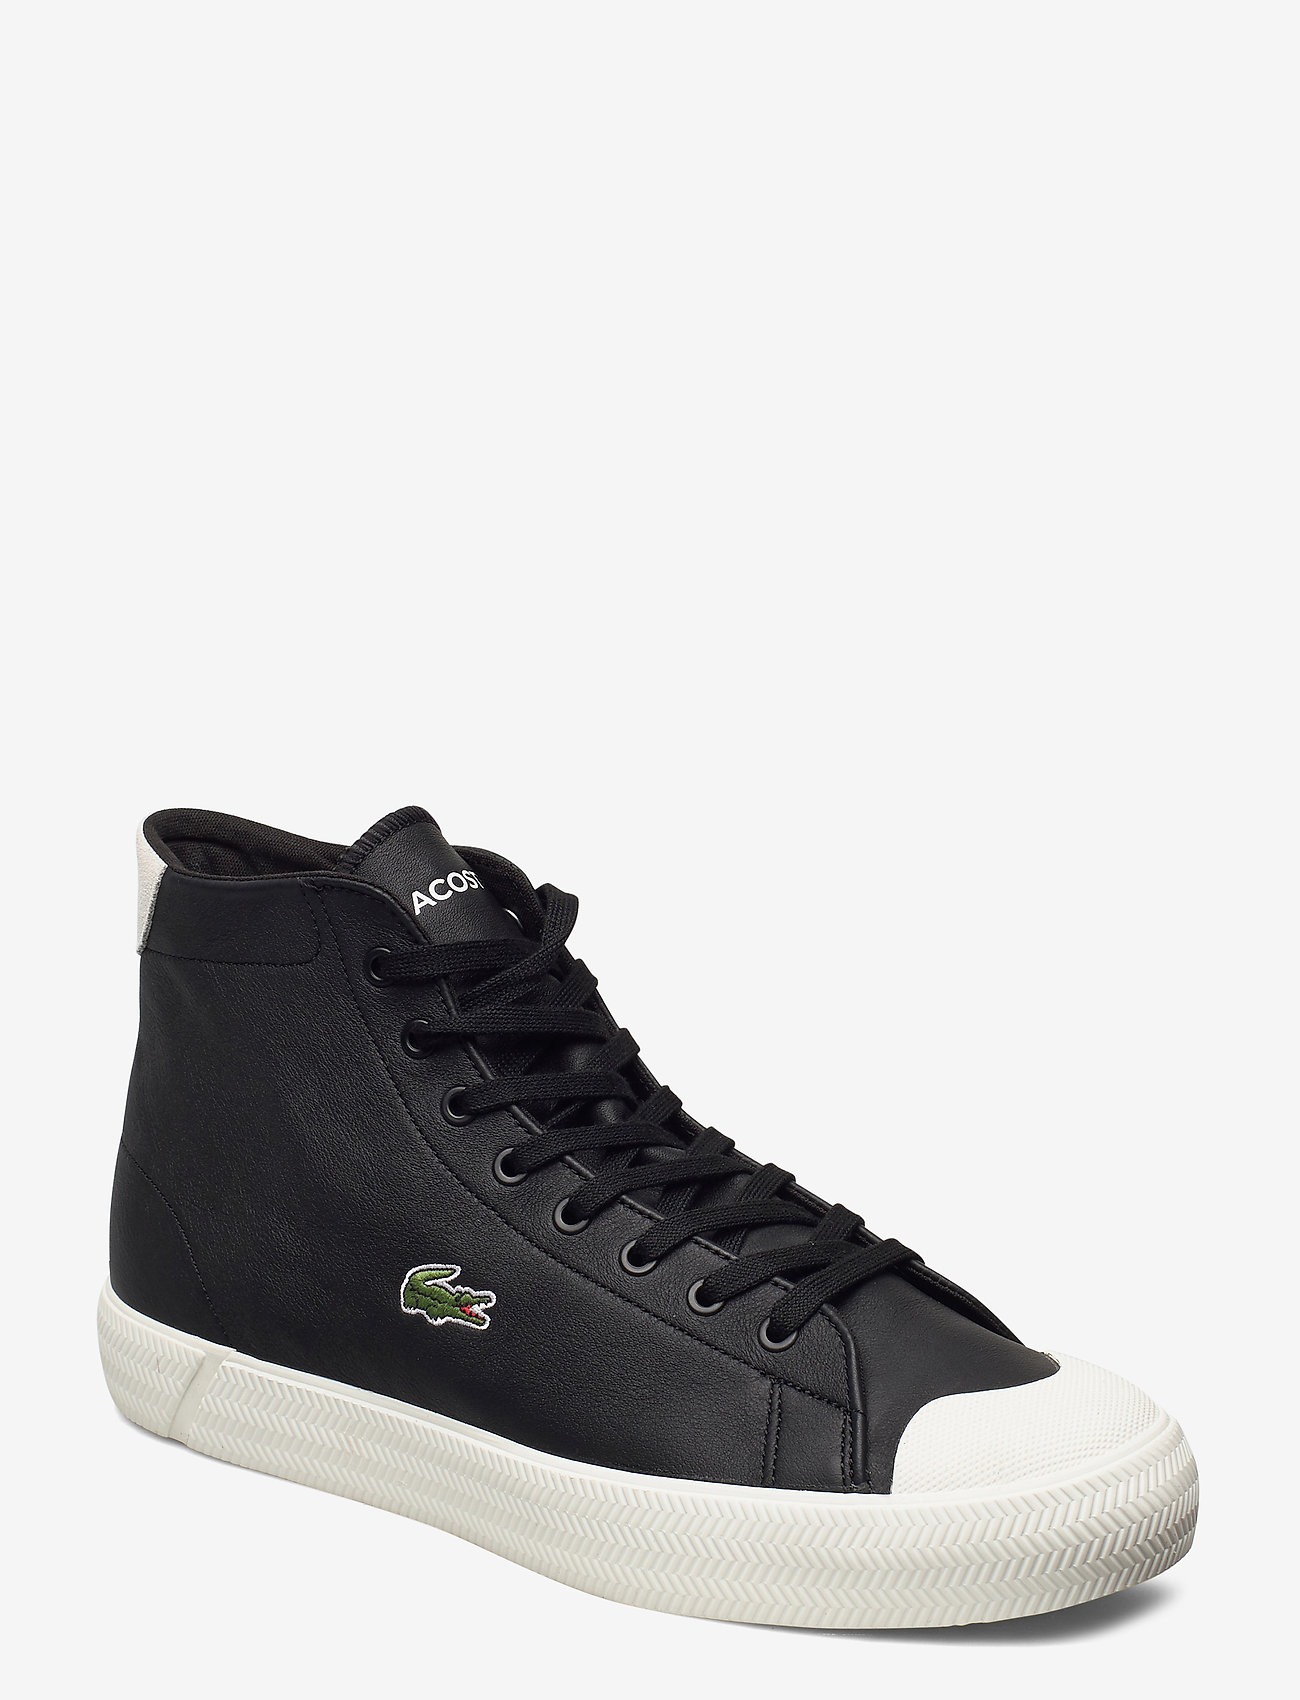 lacoste high top sneakers